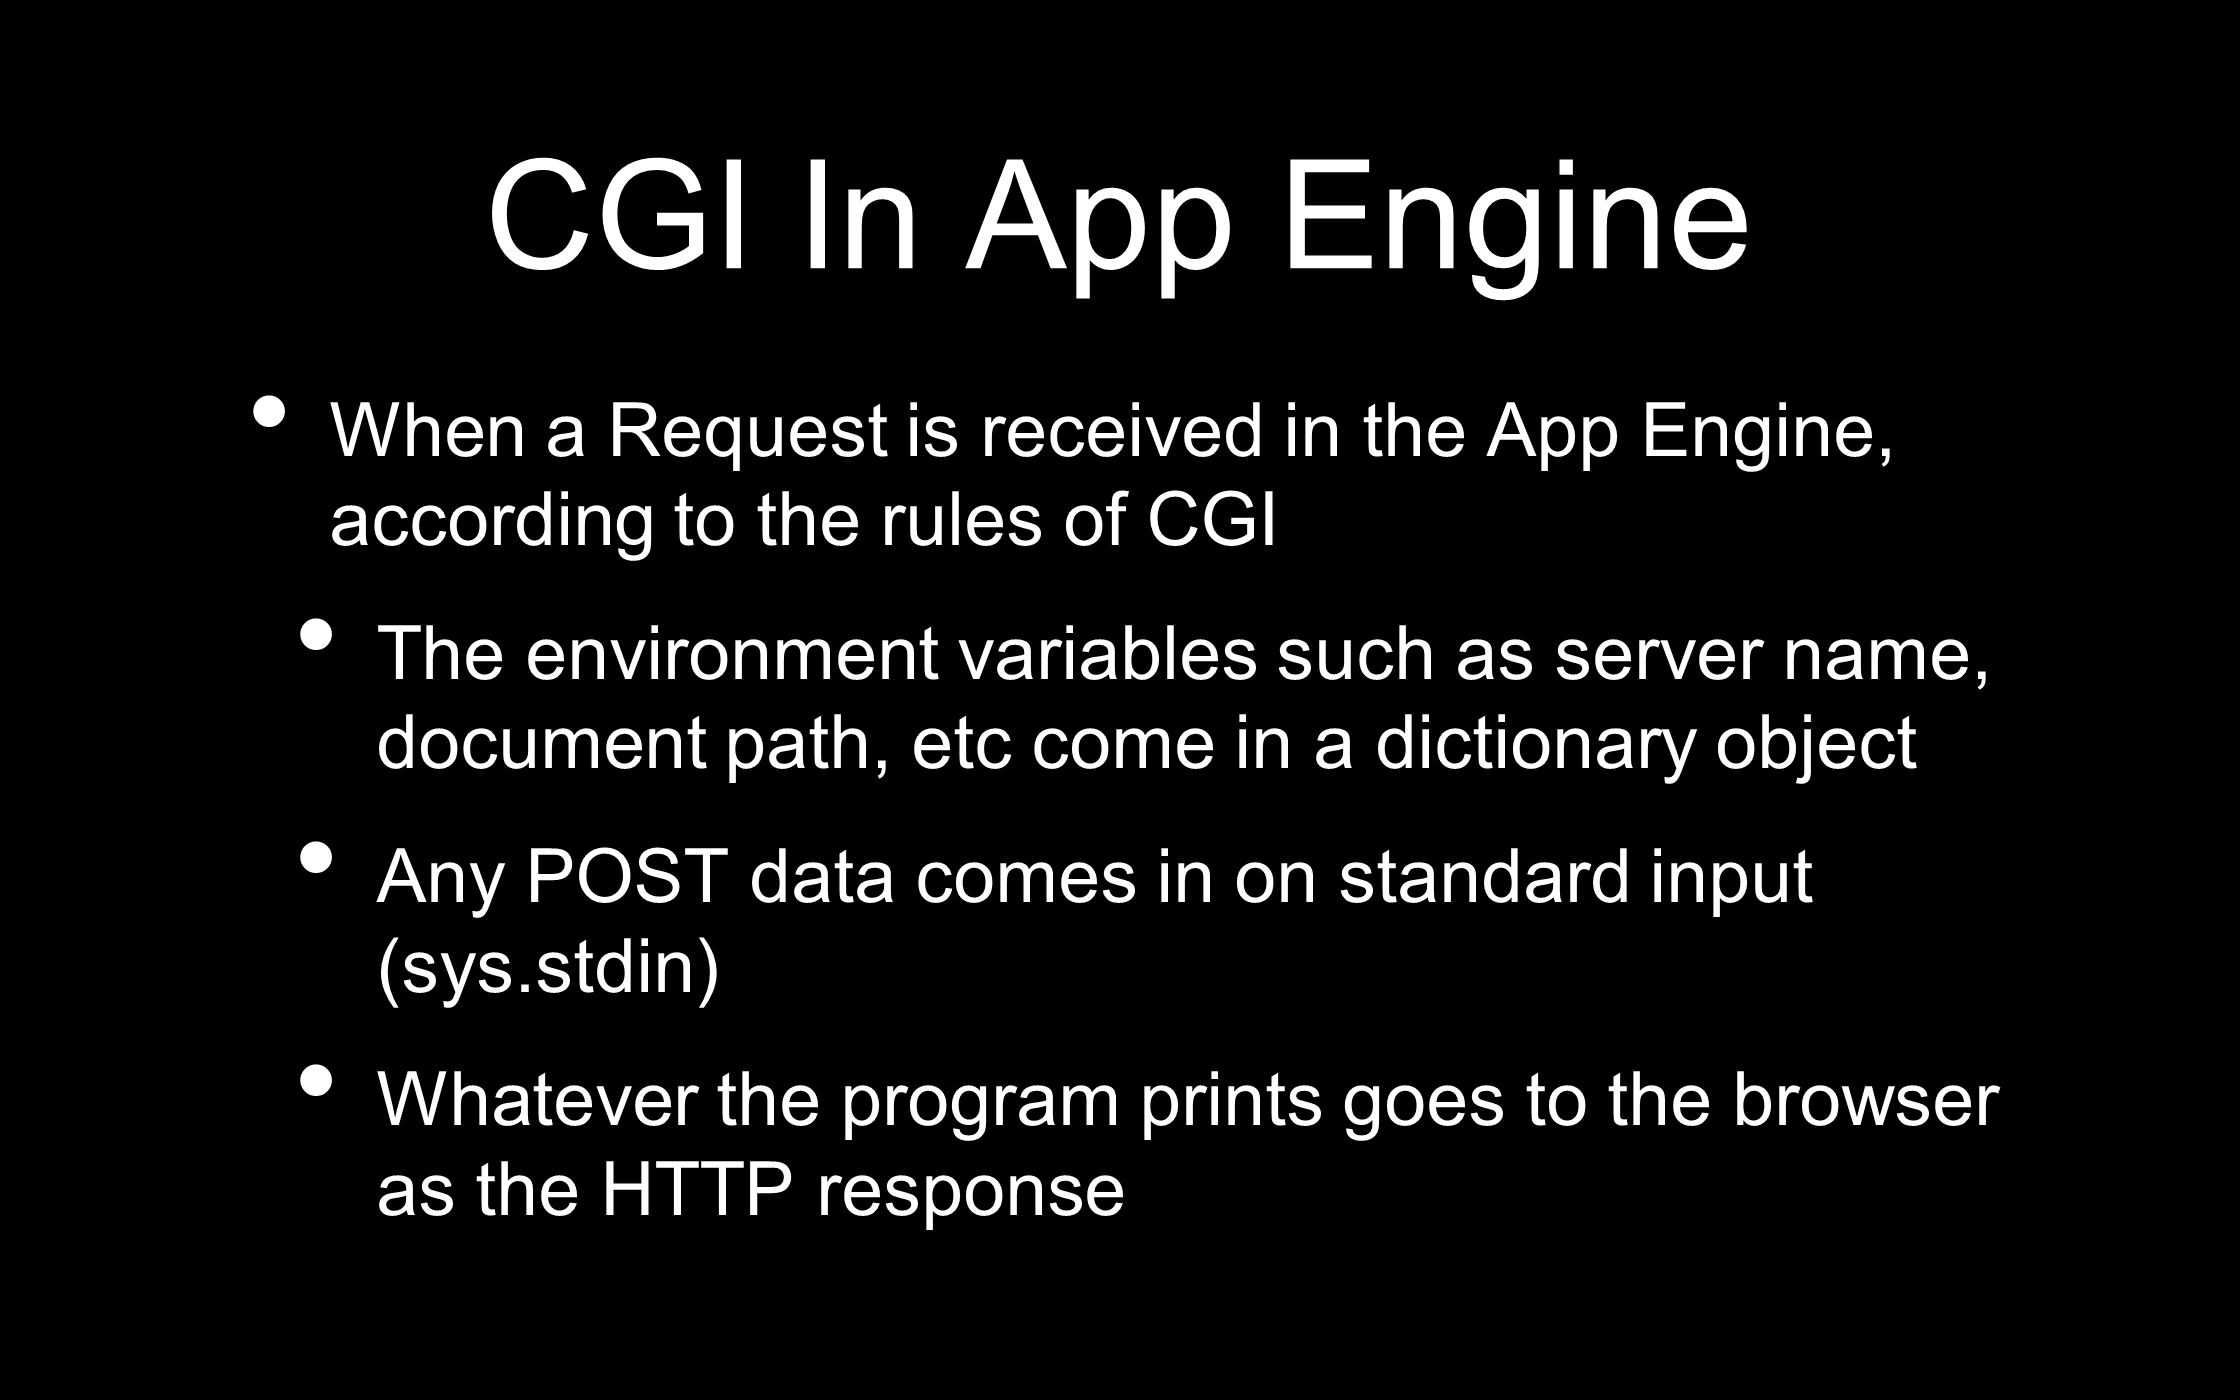 CGI In App Engine When a Request is received in the App Engine, according to the rules of CGI The environment variables such as server name, document path, etc come in a dictionary object Any POST data comes in on standard input (sys.stdin) Whatever the program prints goes to the browser as the HTTP response